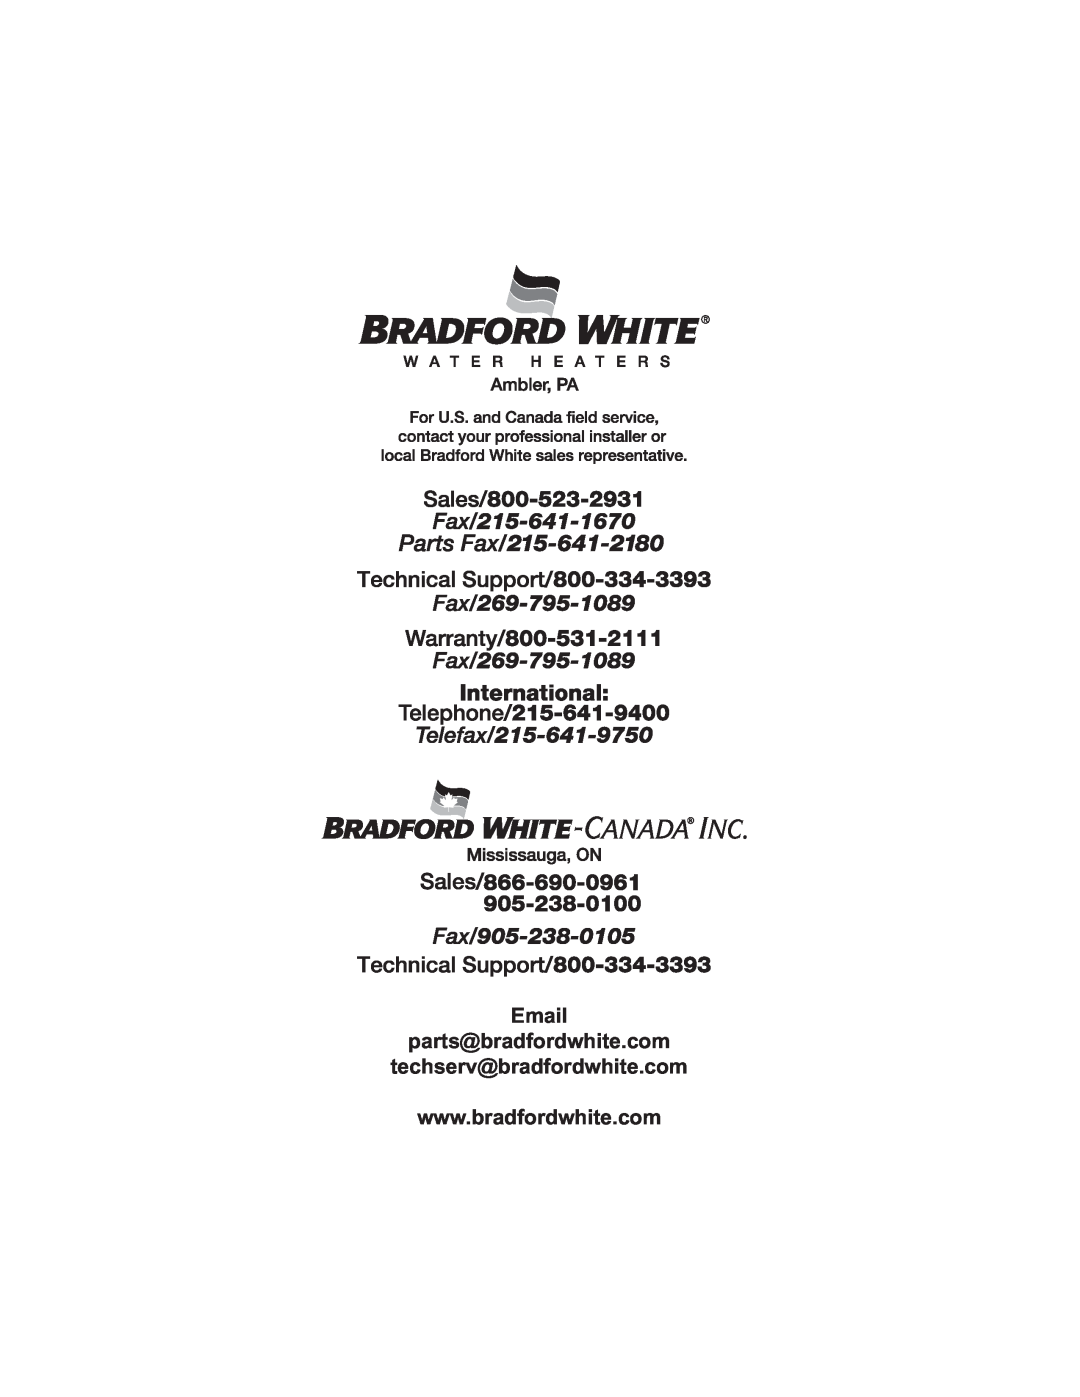 Bradford-White Corp 65T65, 50T65 dimensions Email parts@bradfordwhite.com techserv@bradfordwhite.com 